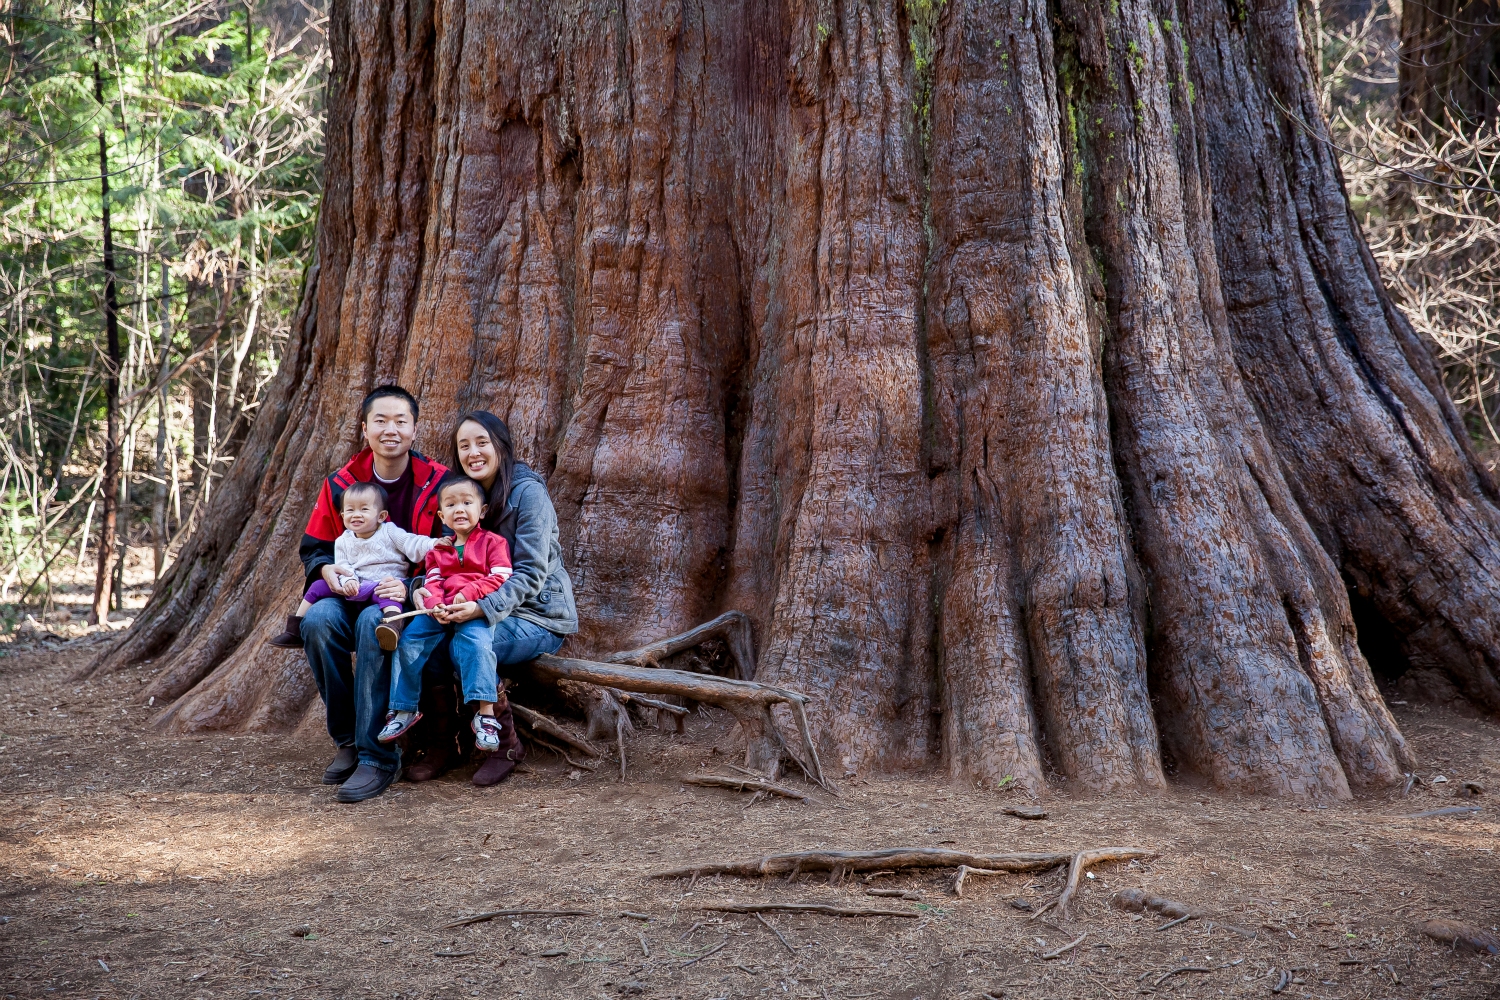 Another very big tree at Calaveras Big Trees State Park